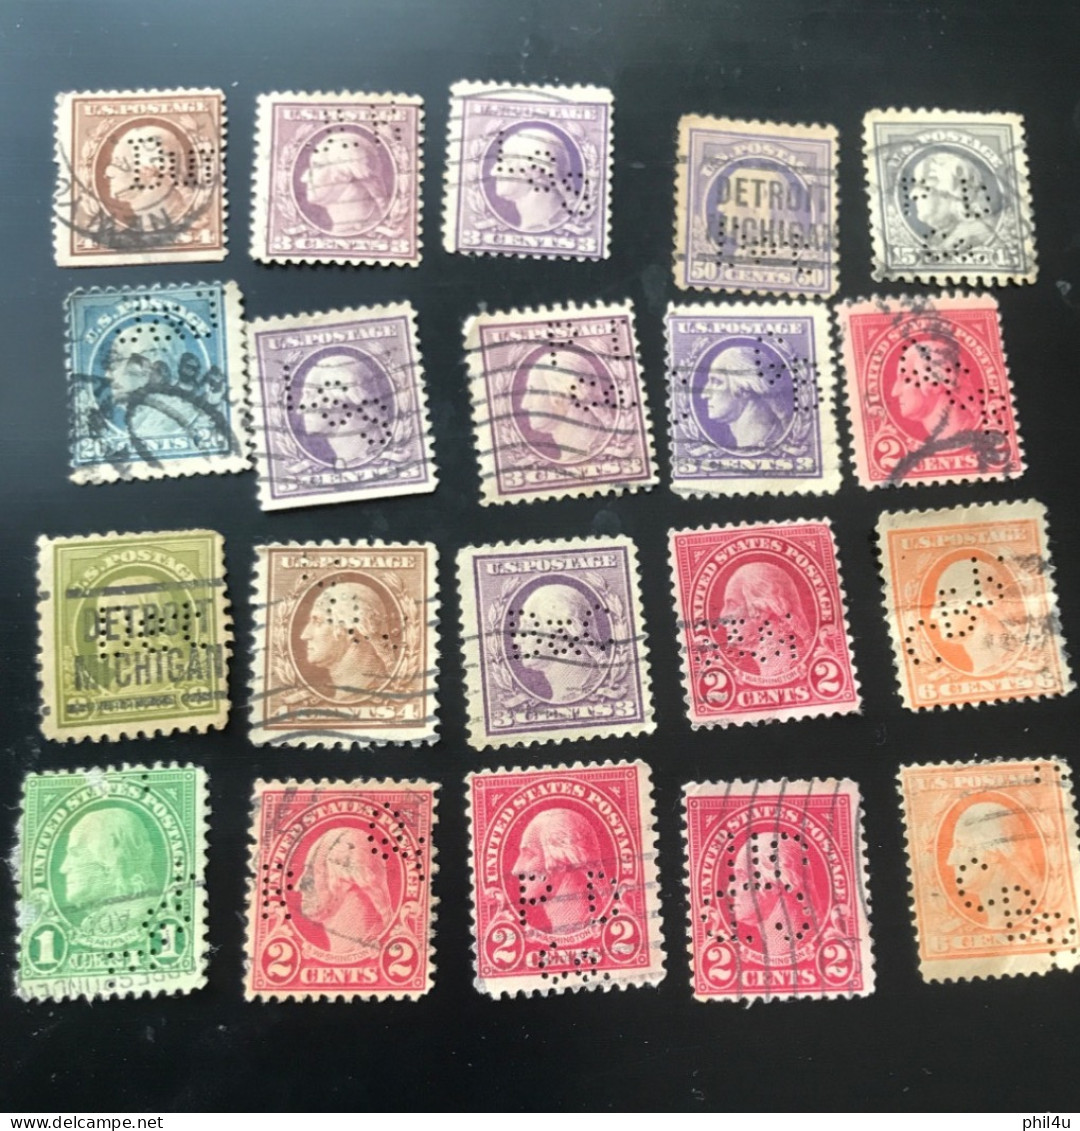 US 35+ Lot Used Old Stamps Perfin With Few Stamps Faults See Scan - Perfins